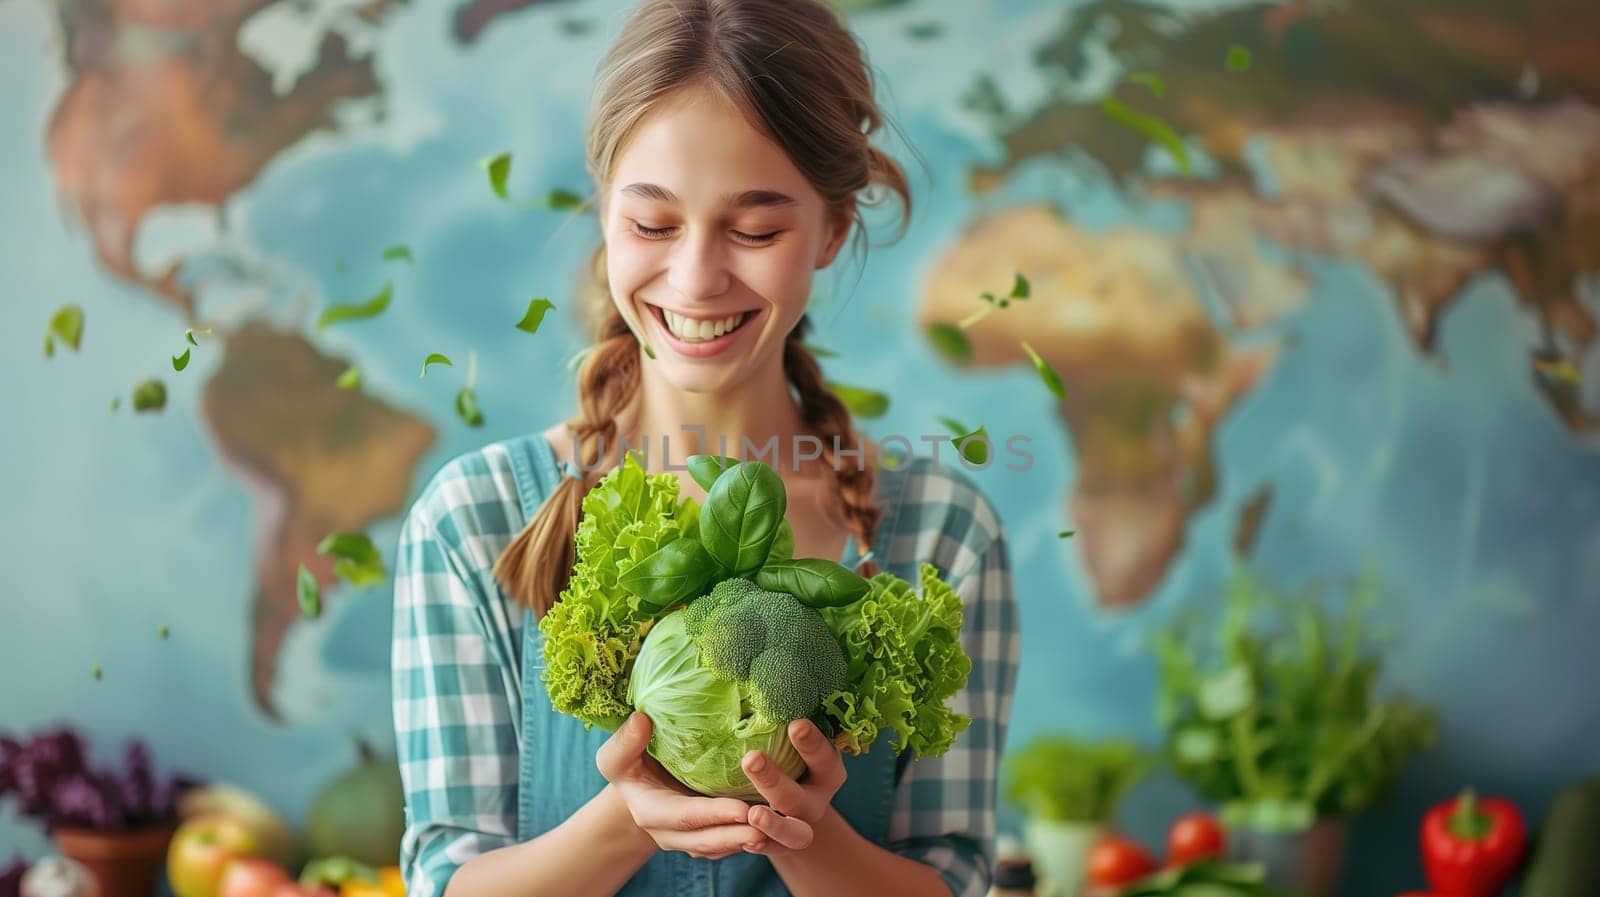 A woman holding a head of lettuce stands in front of a detailed world map. She appears to be examining the lettuce against the backdrop of the map, possibly indicating a connection between global agriculture and nutrition.